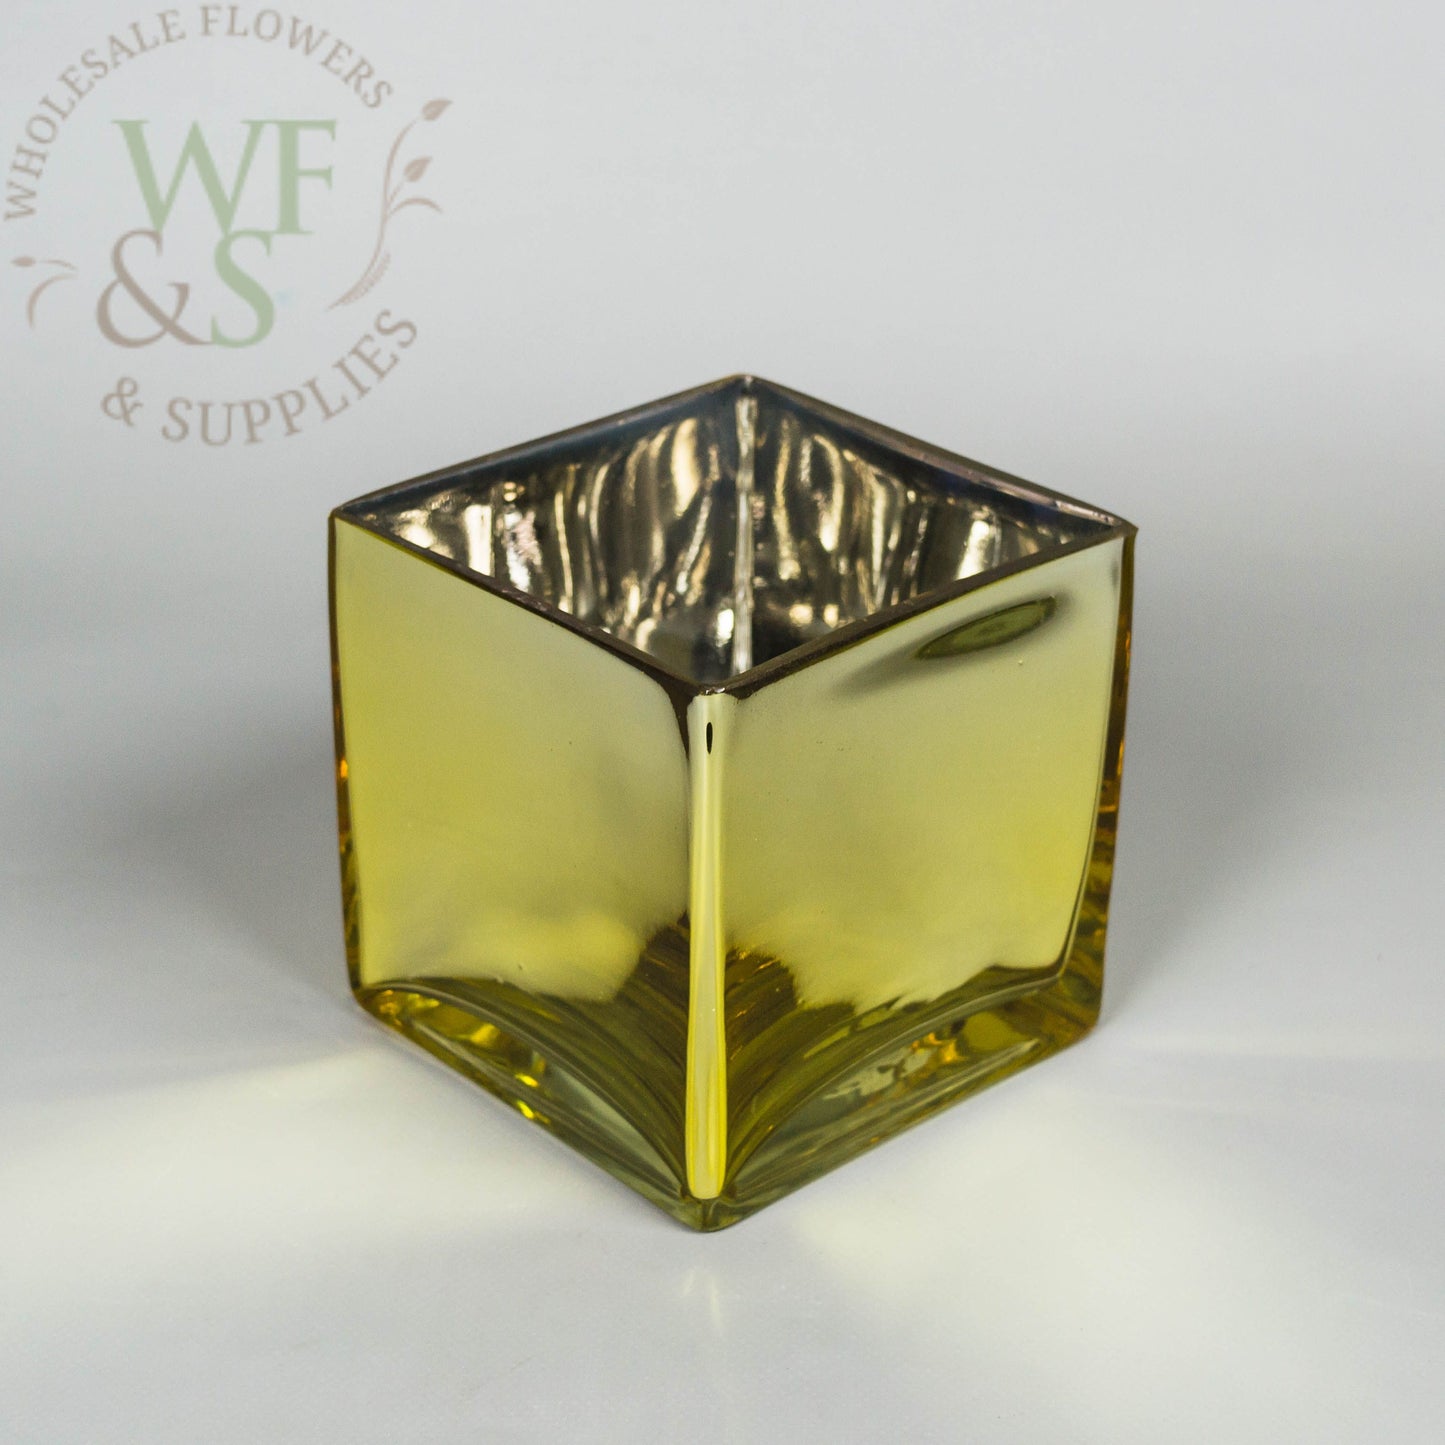 Mirrored Gold Square Glass Vase 4.6 x 4.6